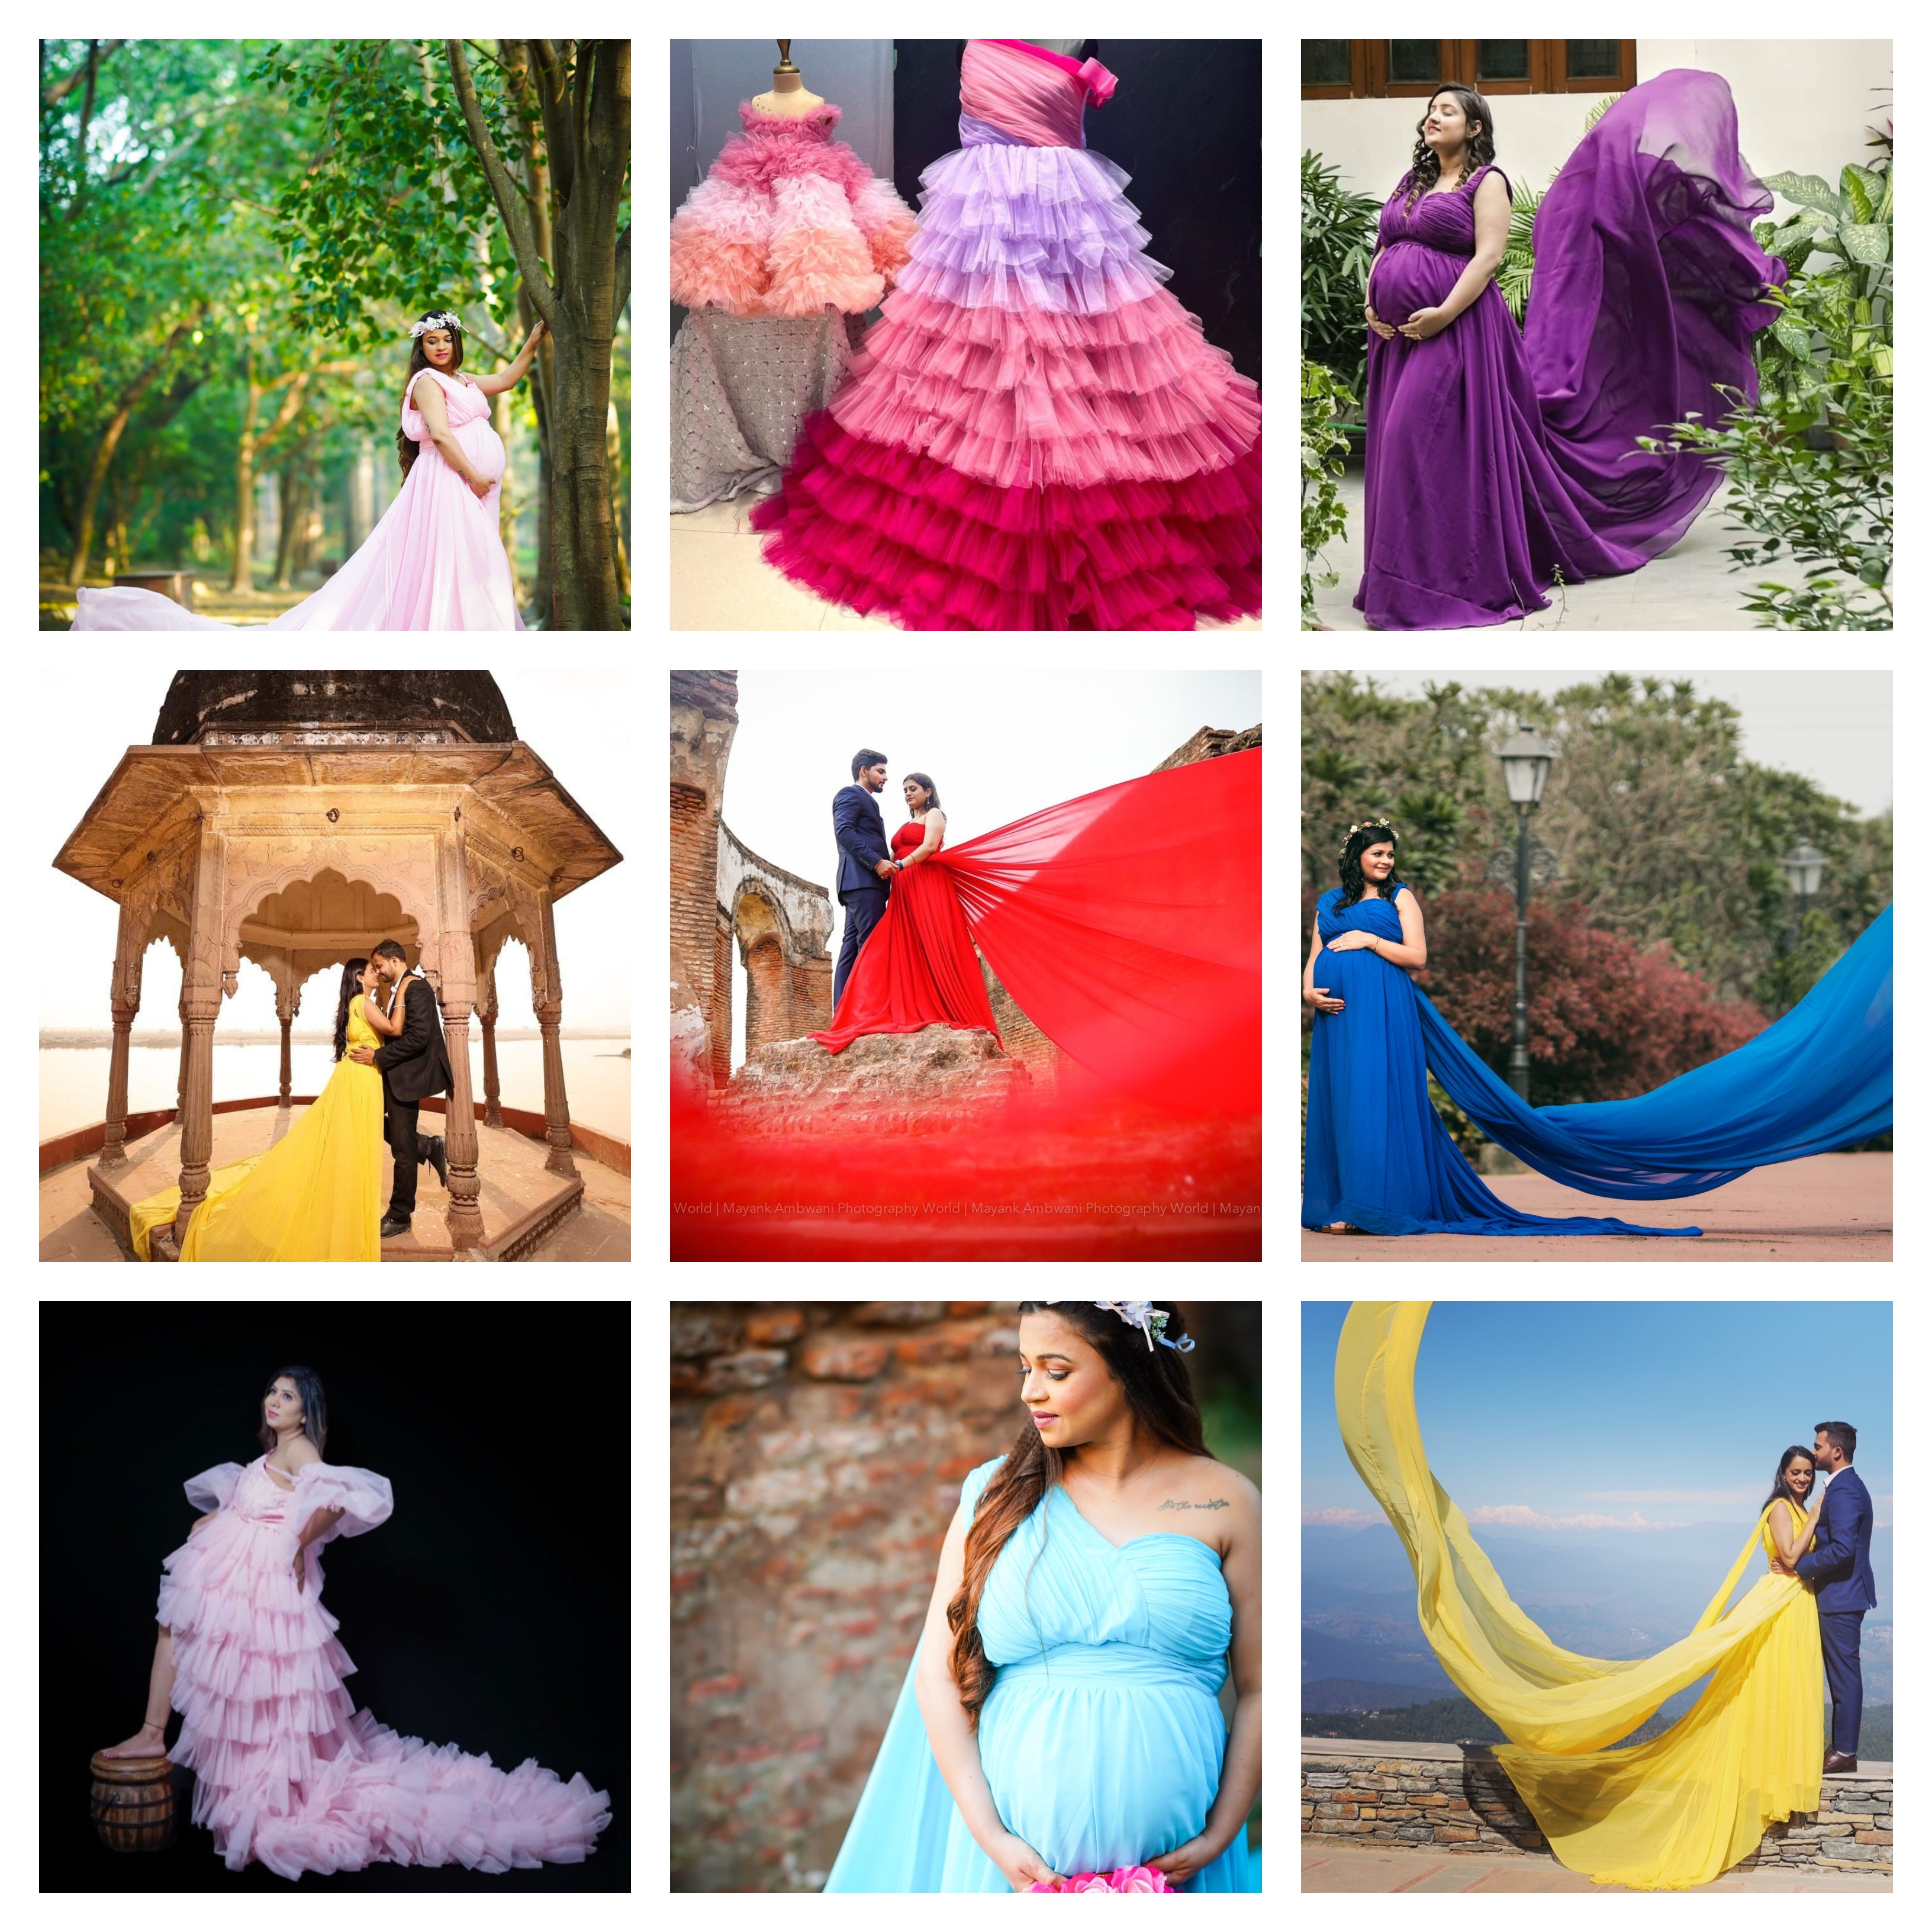 13 Gown rental services in Kuala Lumpur for weddings and events